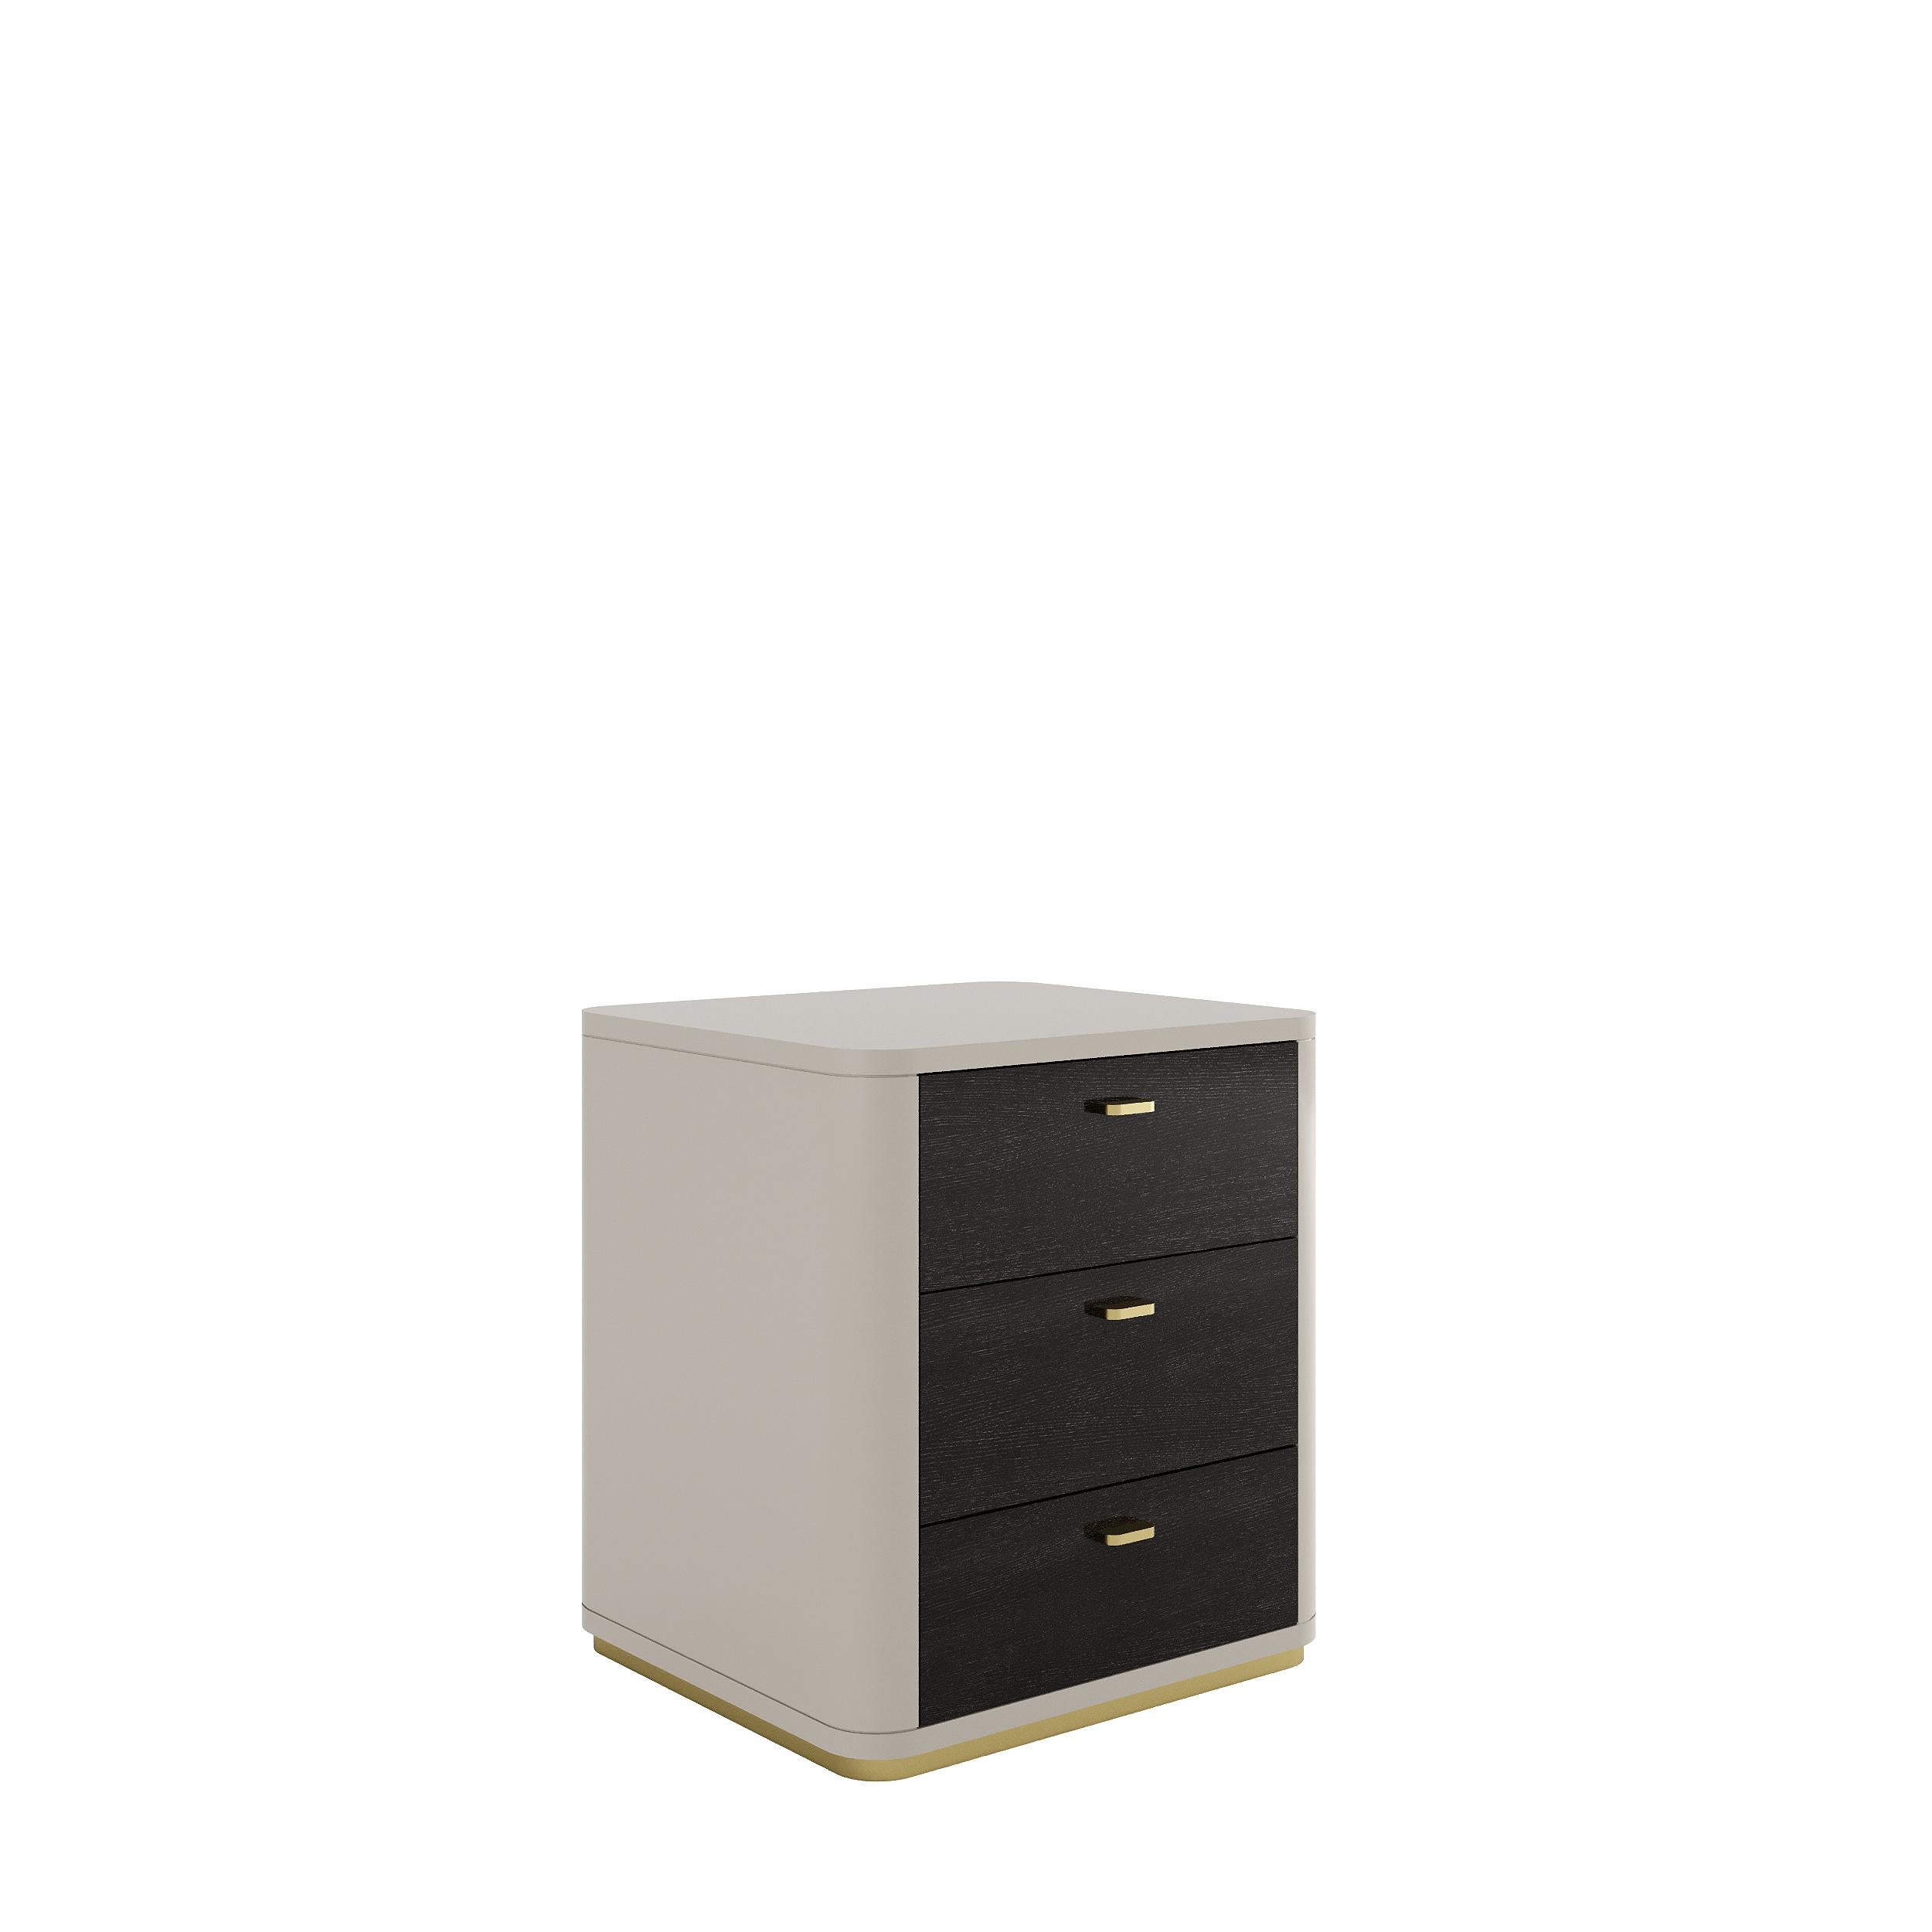 Portuguese CRIS II Nightstand - 3 drawers For Sale